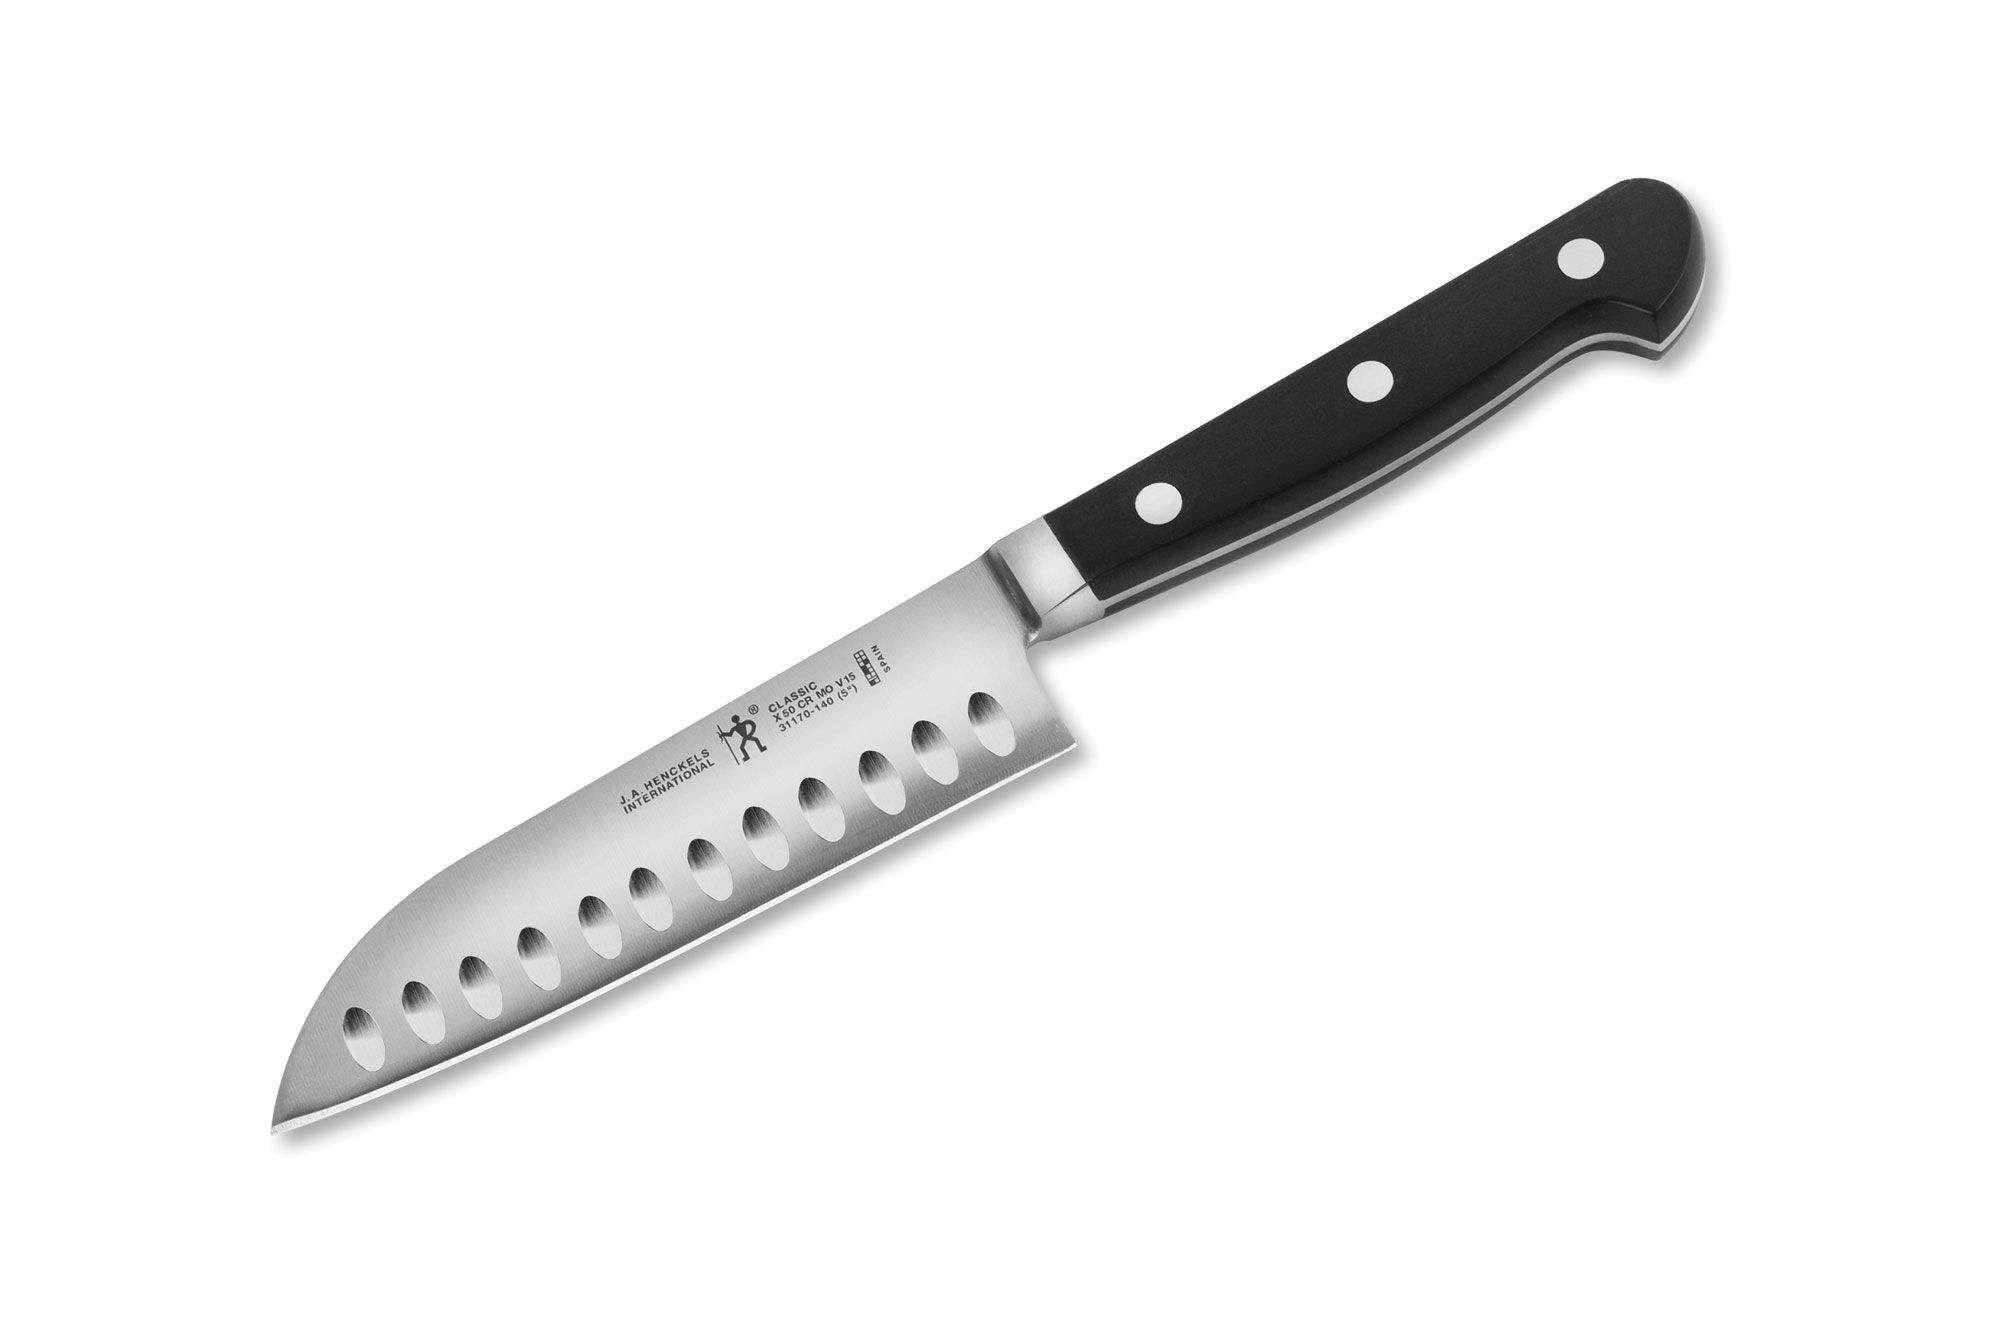 Henckels Statement 5-inch Hollow Edge Santoku Knife, 5-inch - Dillons Food  Stores